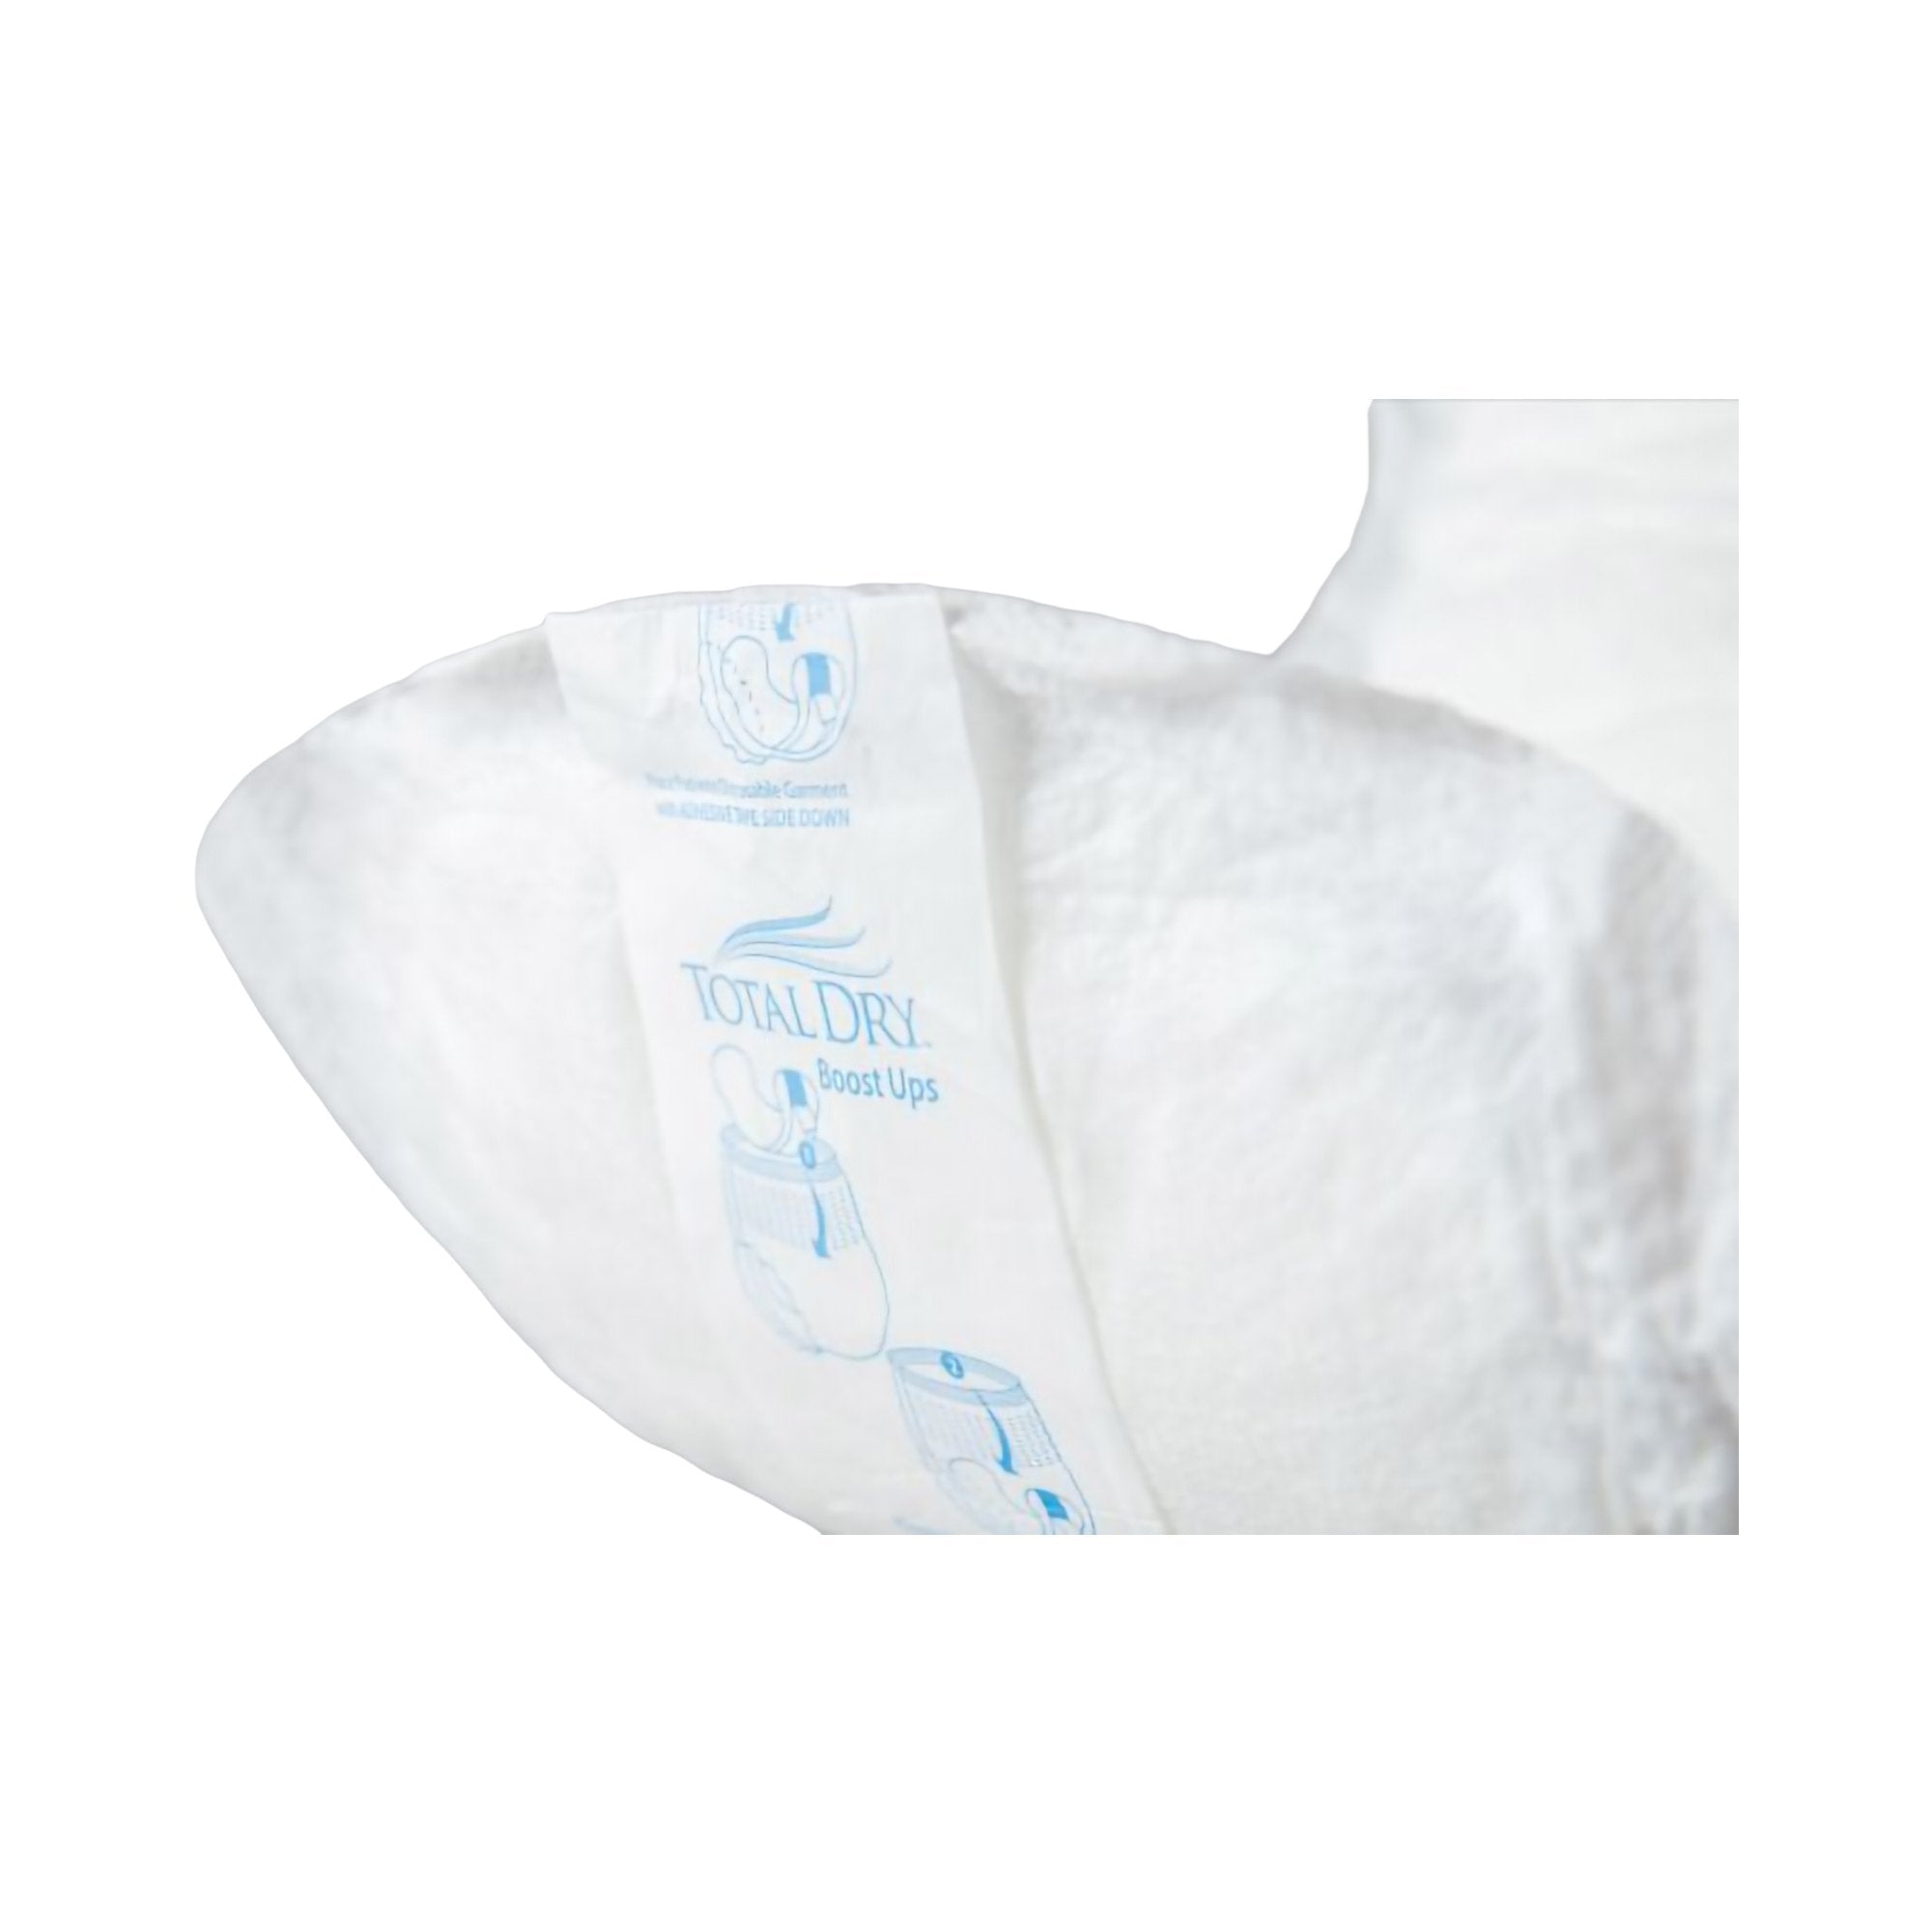 Booster Pad TotalDry™ Ultimate Boost Ups 16-1/2 Inch Length Moderate Absorbency Polymer Core One Size Fits Most